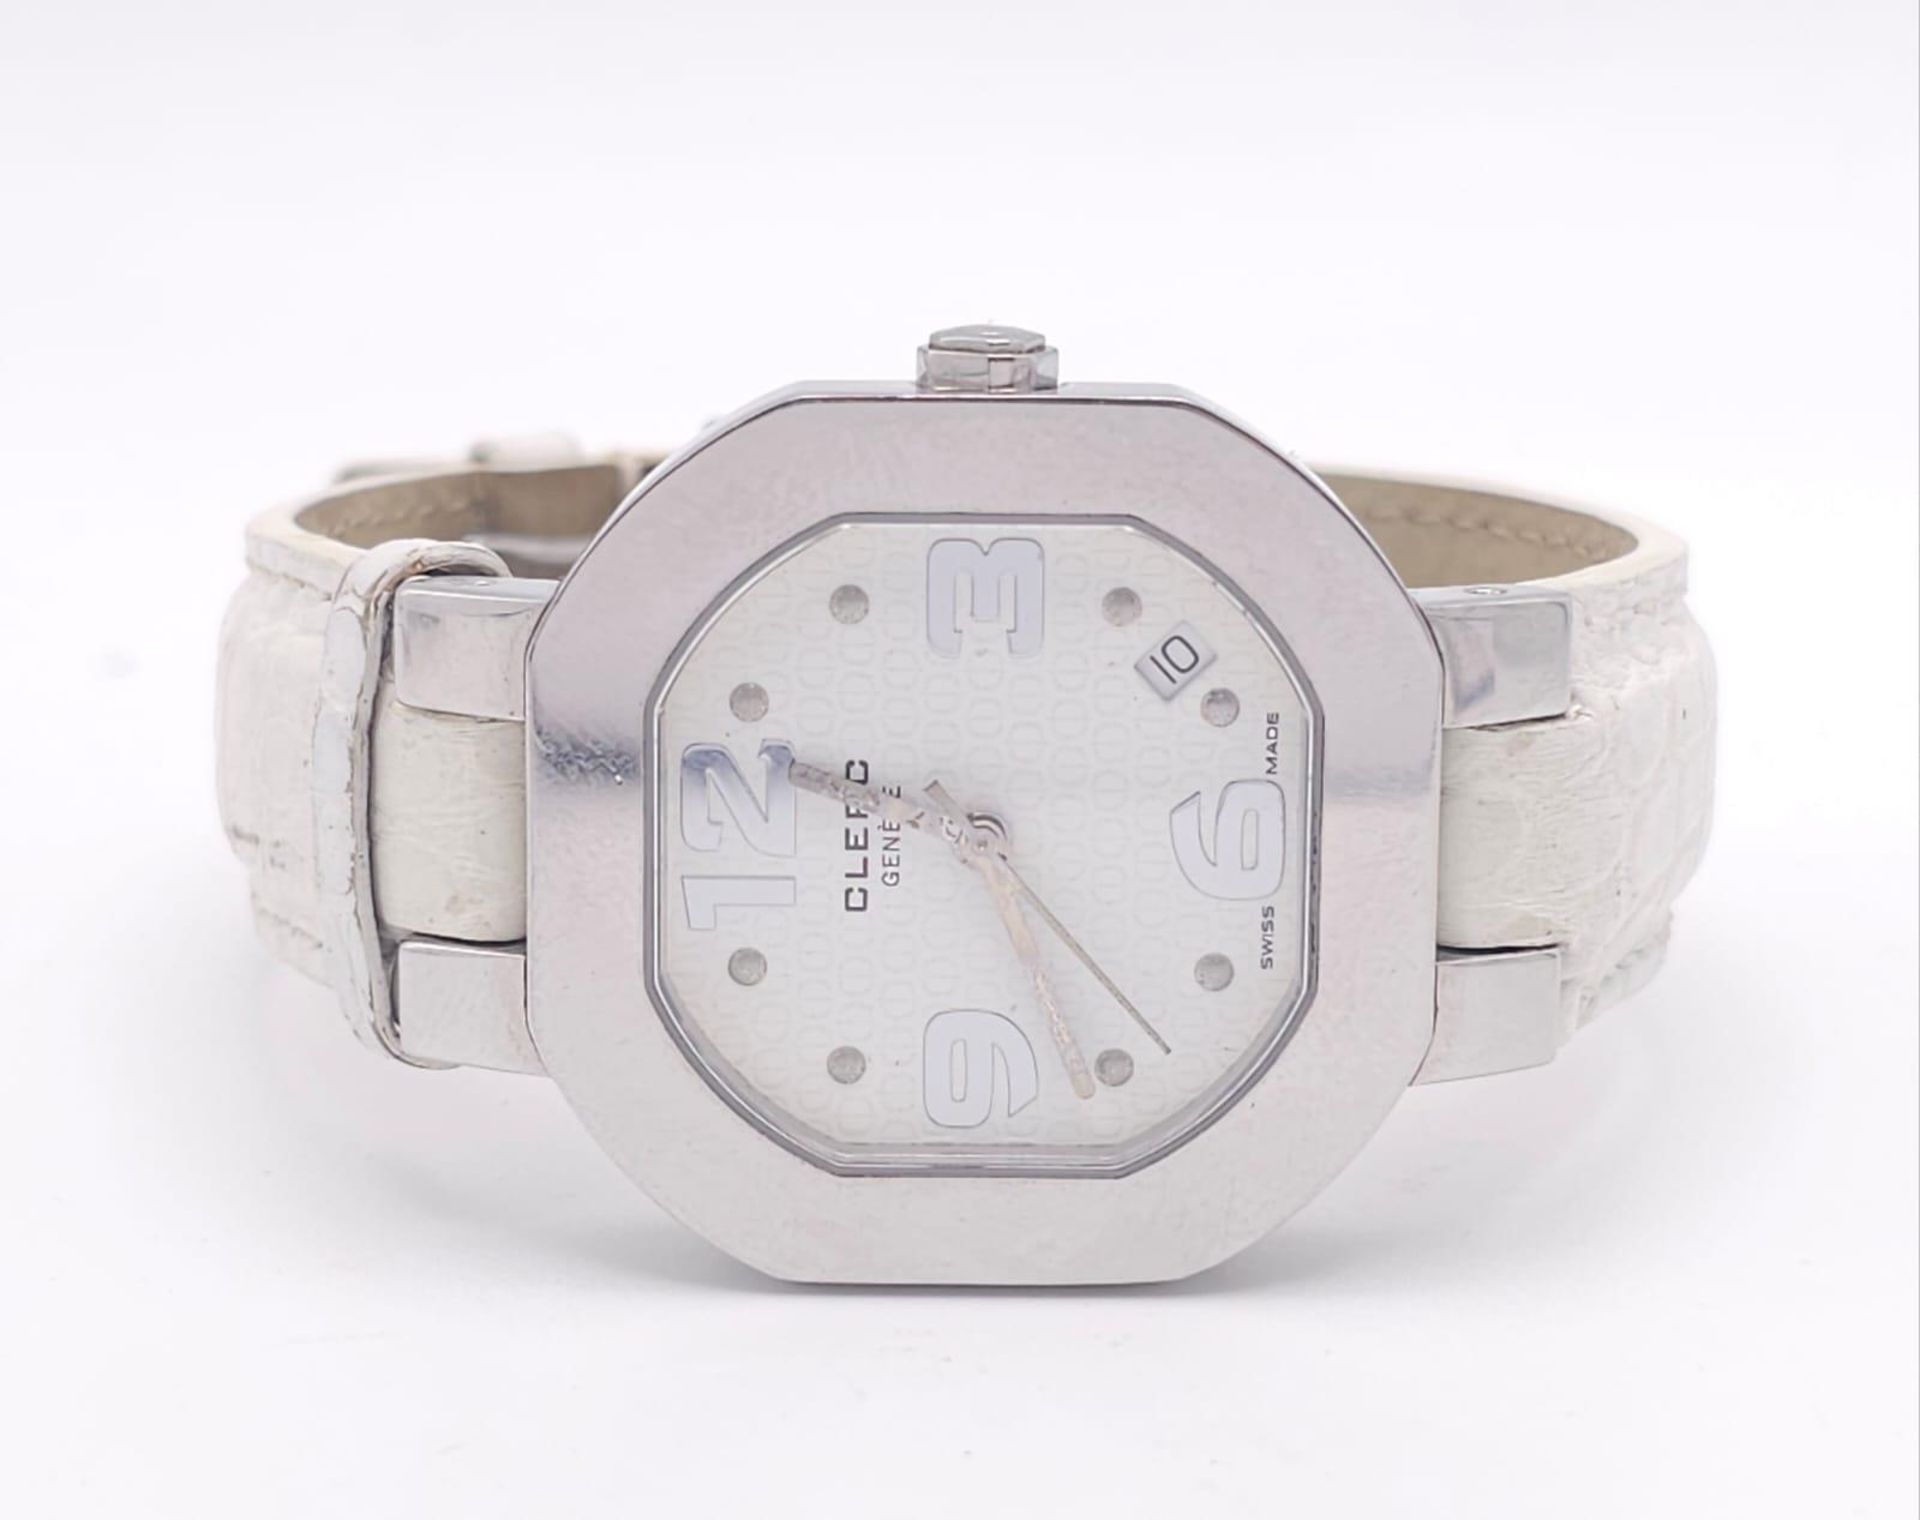 A Clerc C-One Designer Swiss Quartz Gents Watch. White leather strap. Stainless steel case - 36mm. - Image 2 of 10